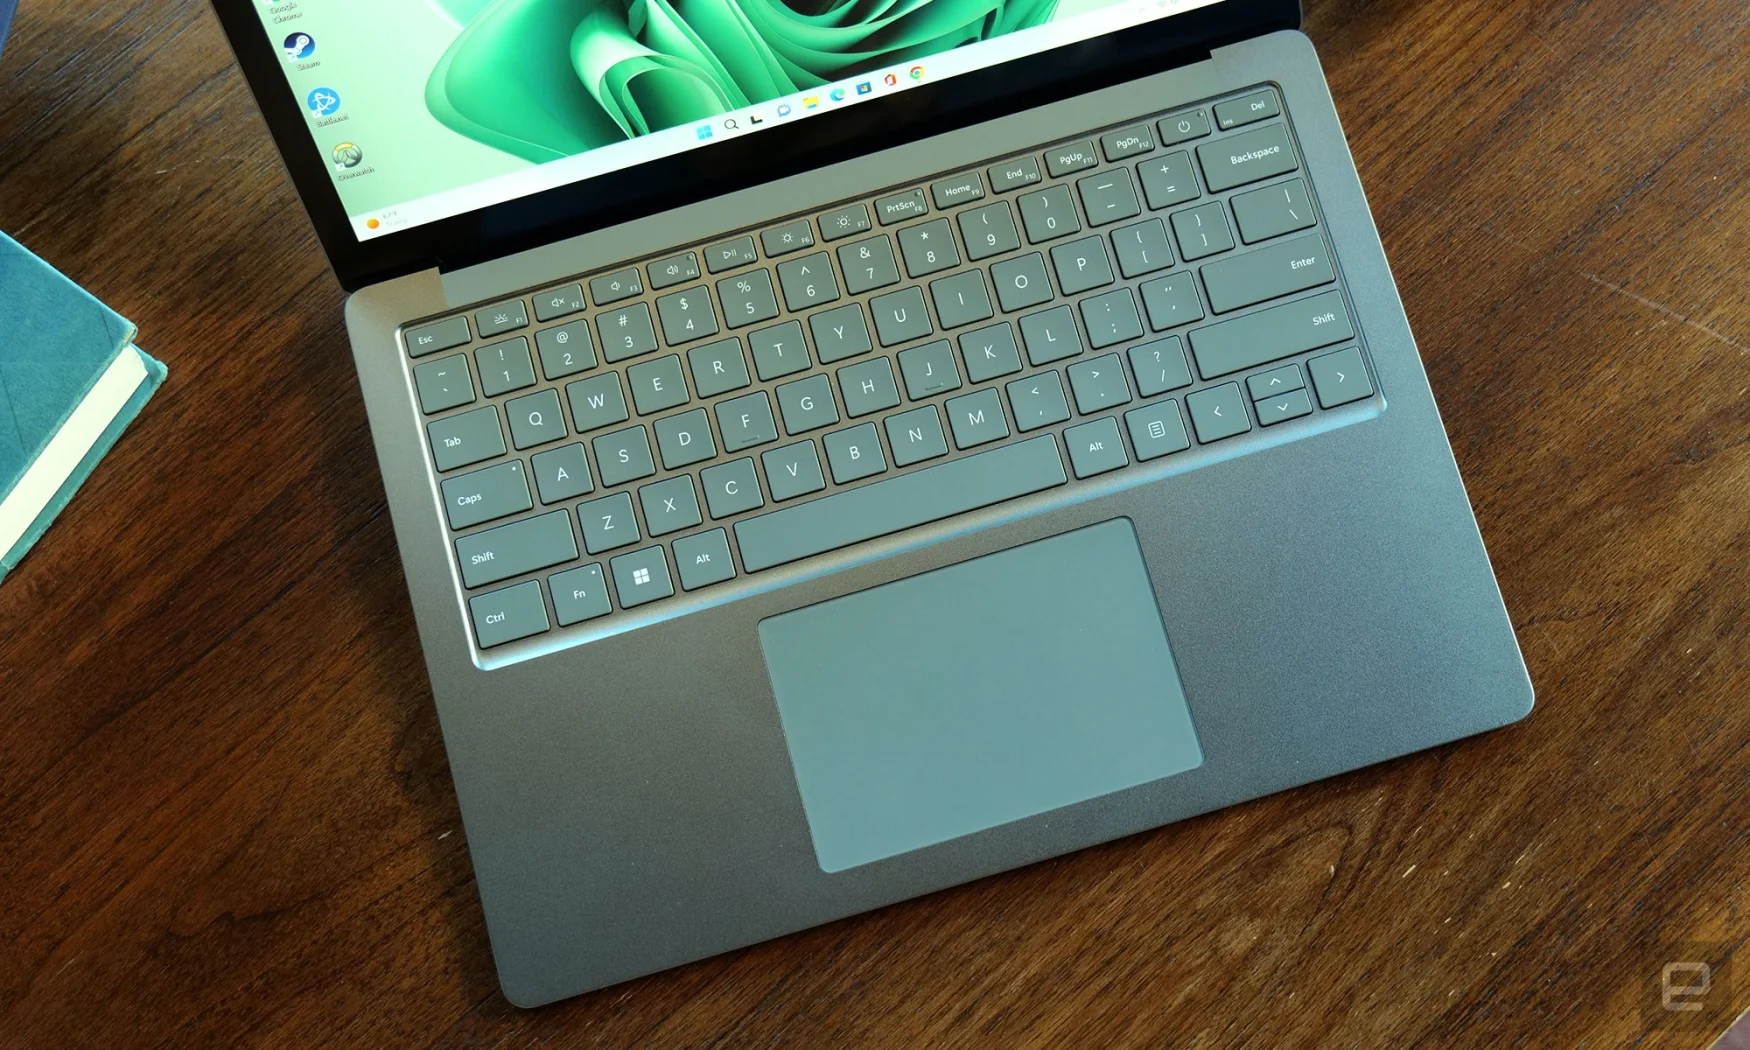 While the Surface Laptop 5's keyboard isn't quite as large as what you'd get on a MacBook, there's still a lot of room to mouse around and the keyboard feels great. 